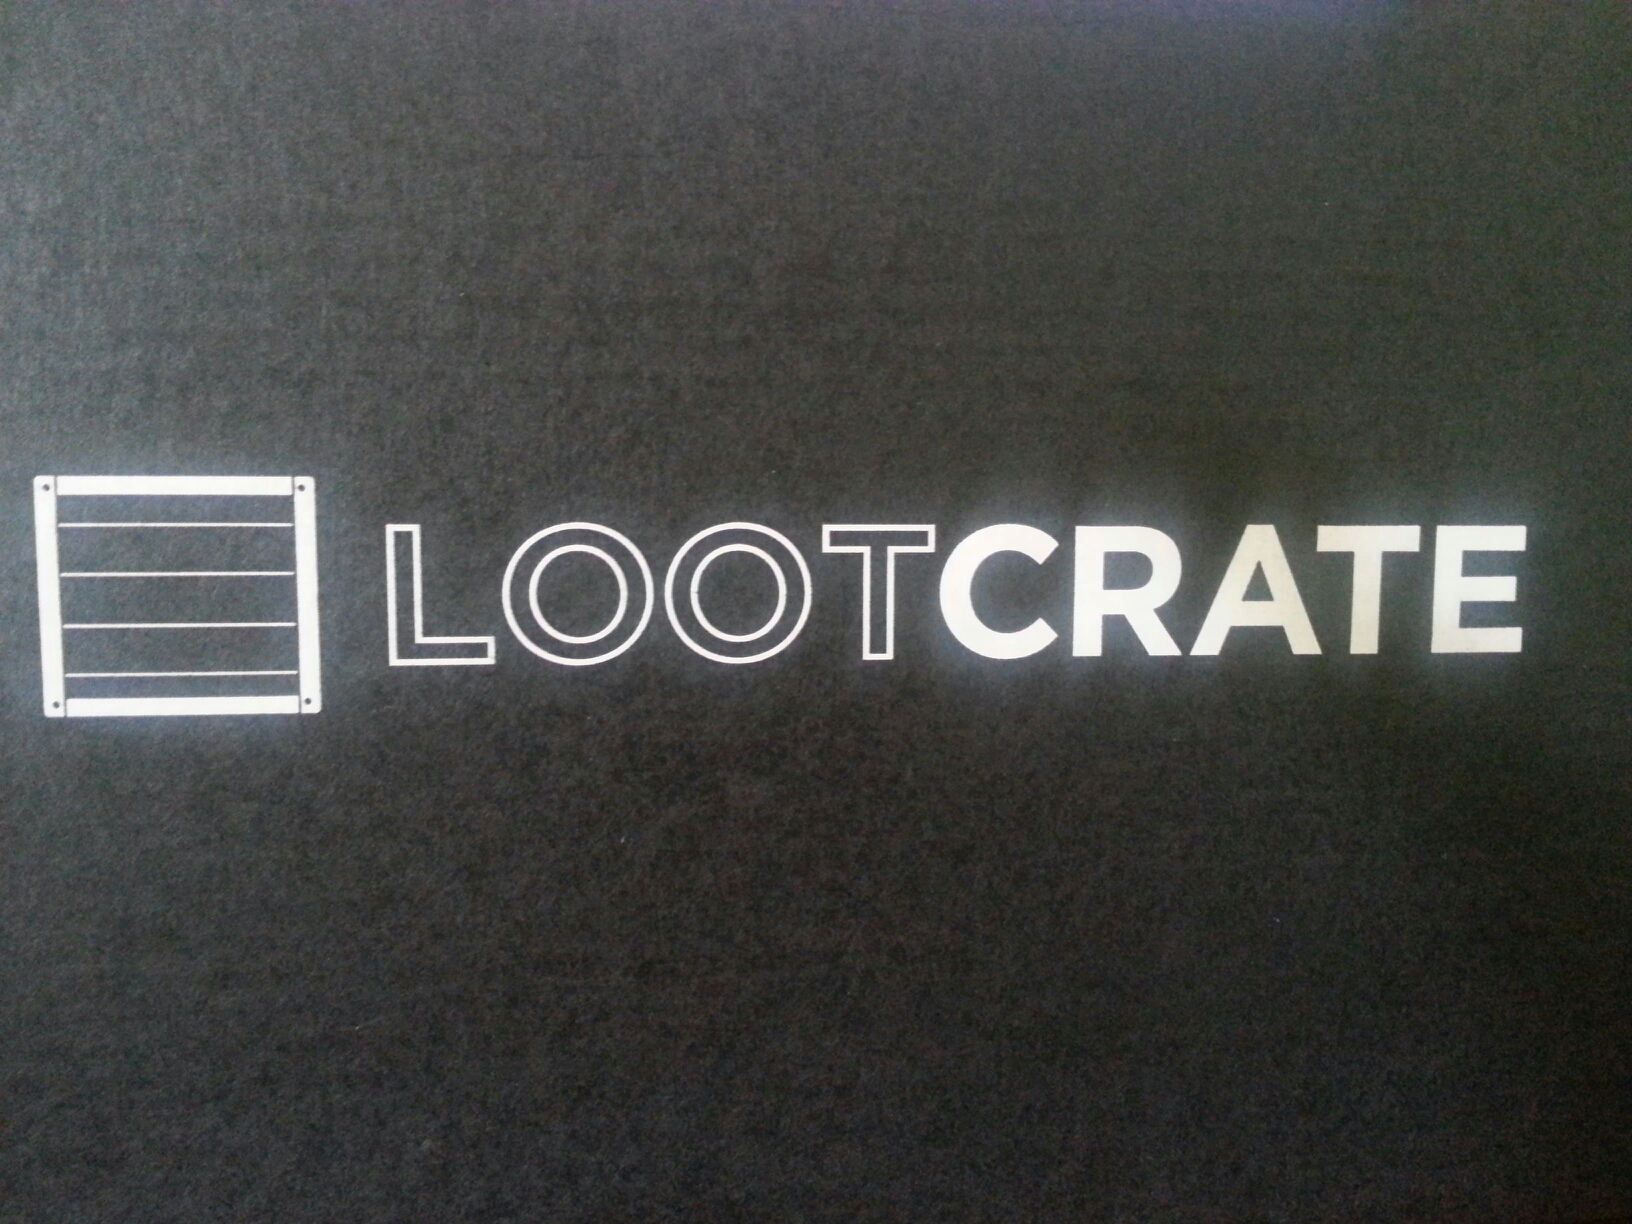 Loot crate june 2014: the ultimate geek & gamer subscription unboxing